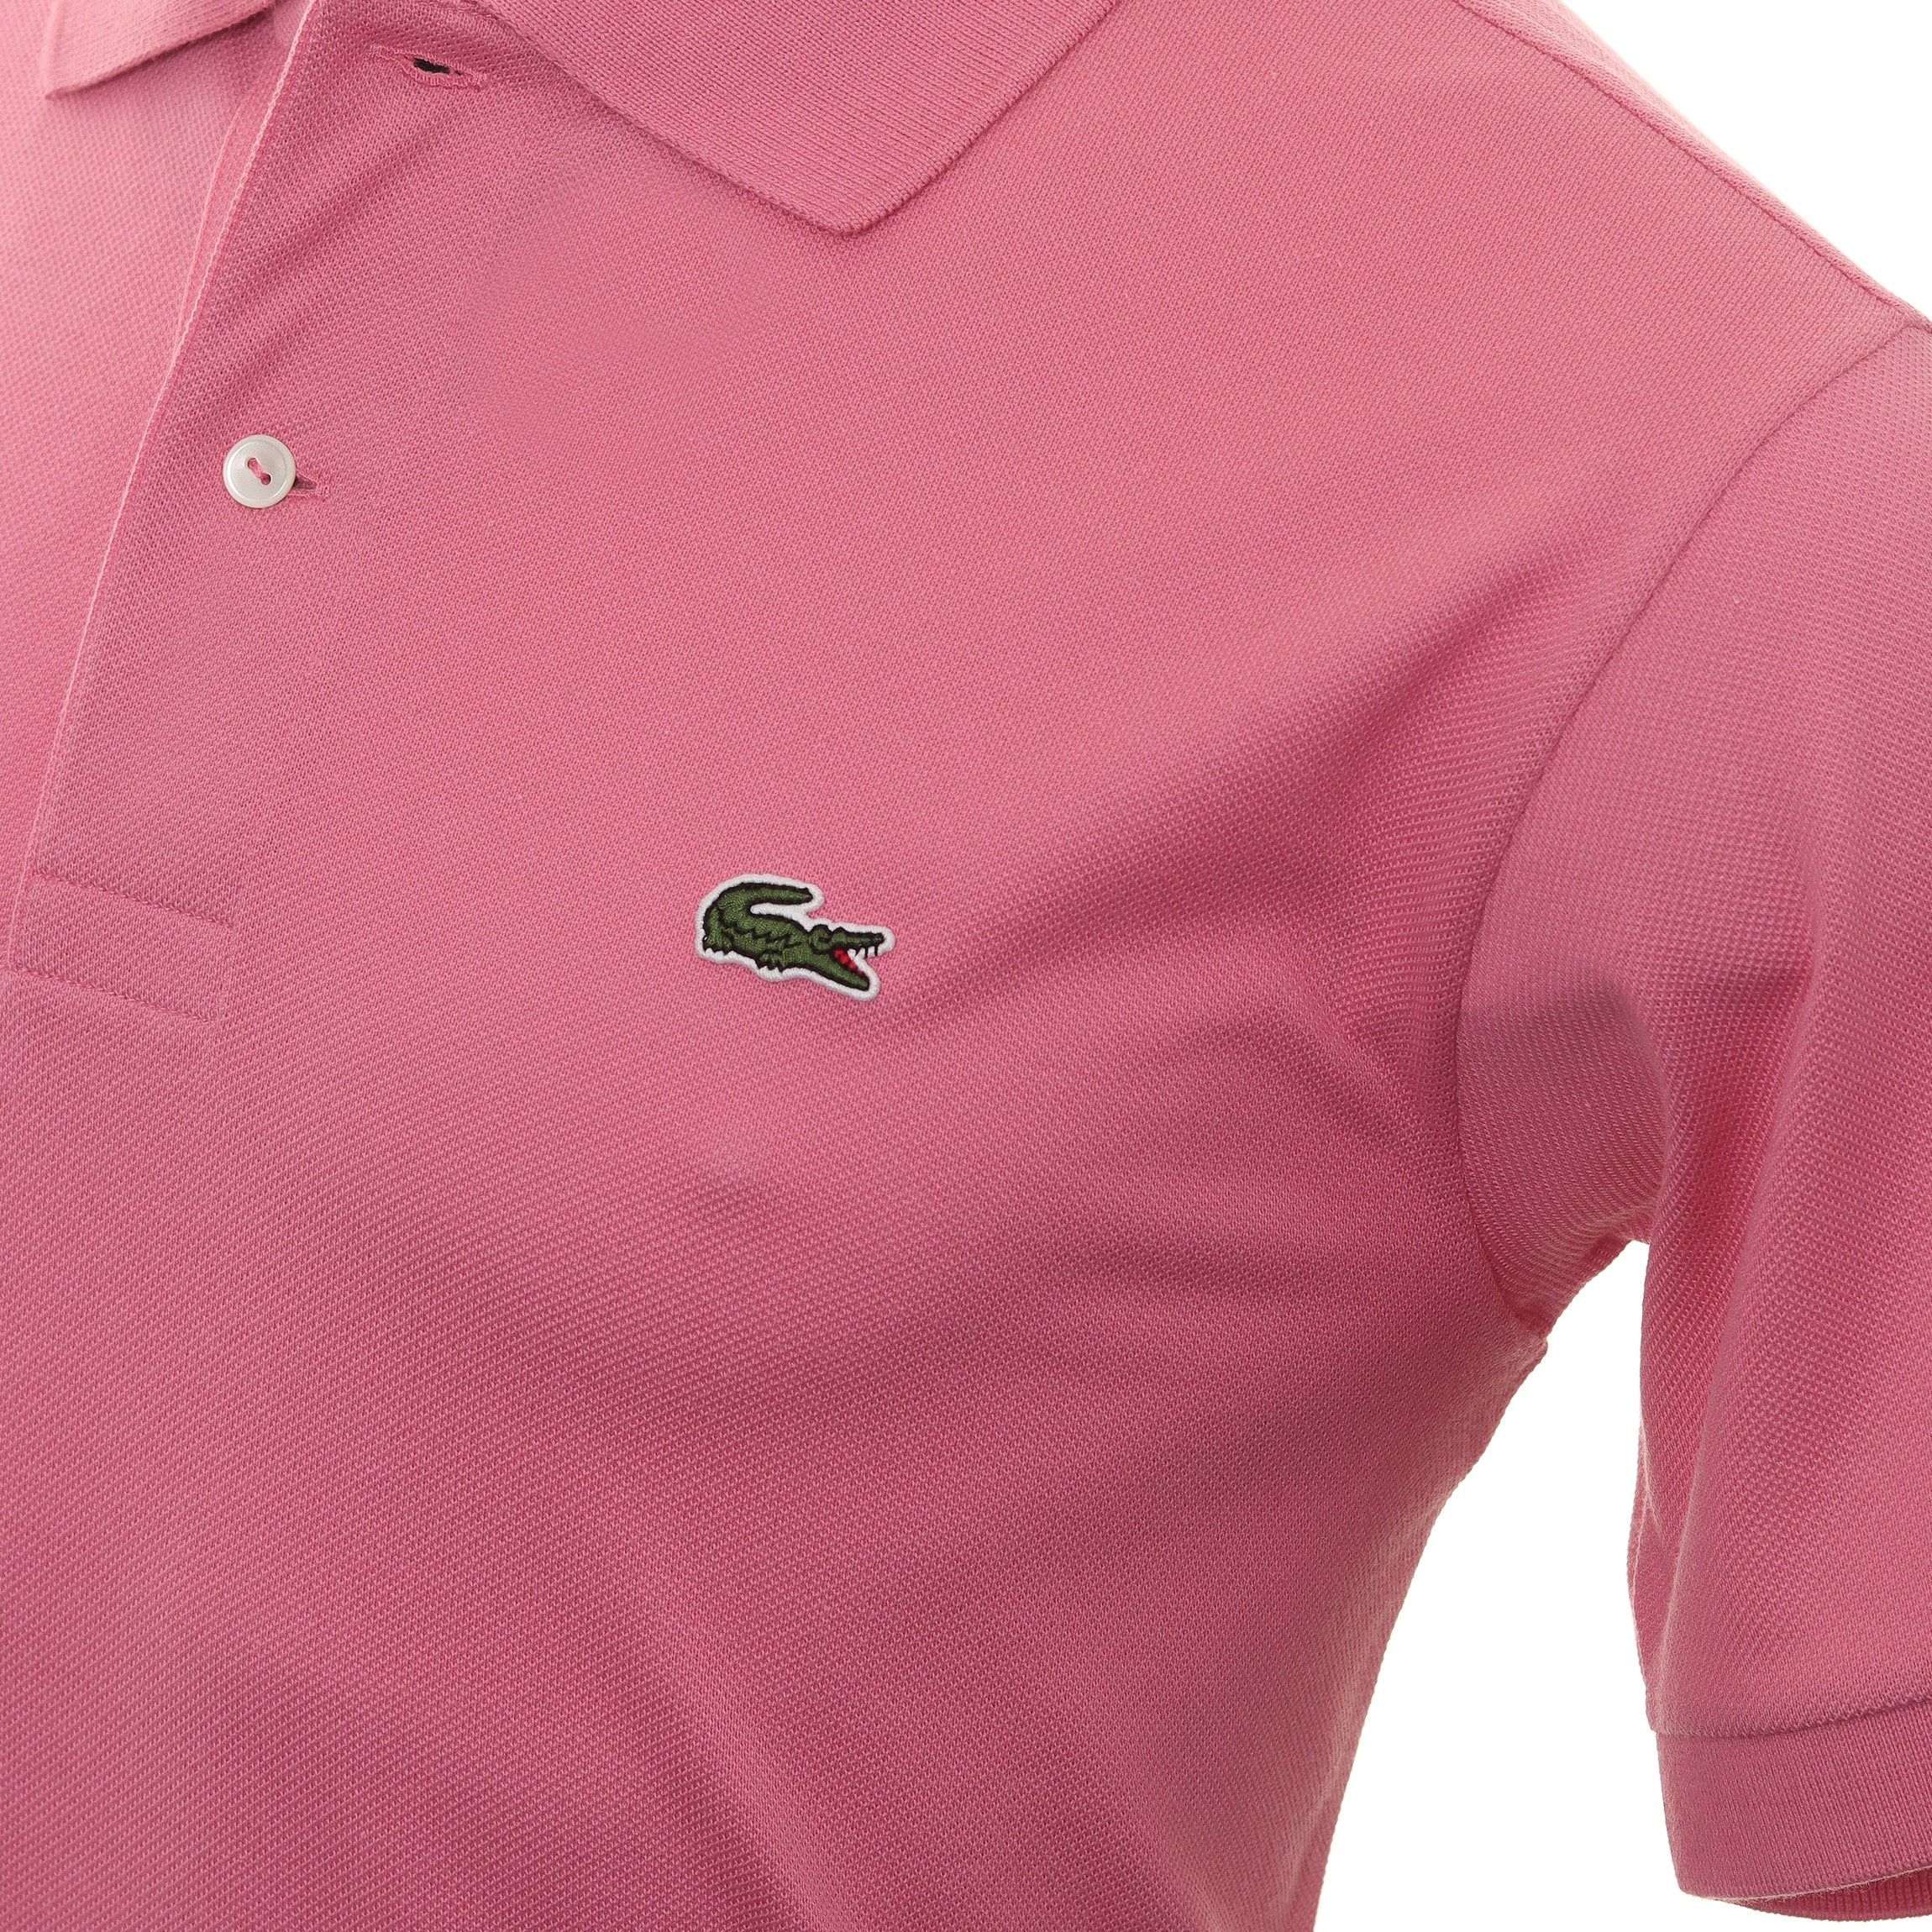 Lacoste Classic Pique | Reseda Polo Function18 Restrictedgs L1212 Pink 2R3 | Shirt